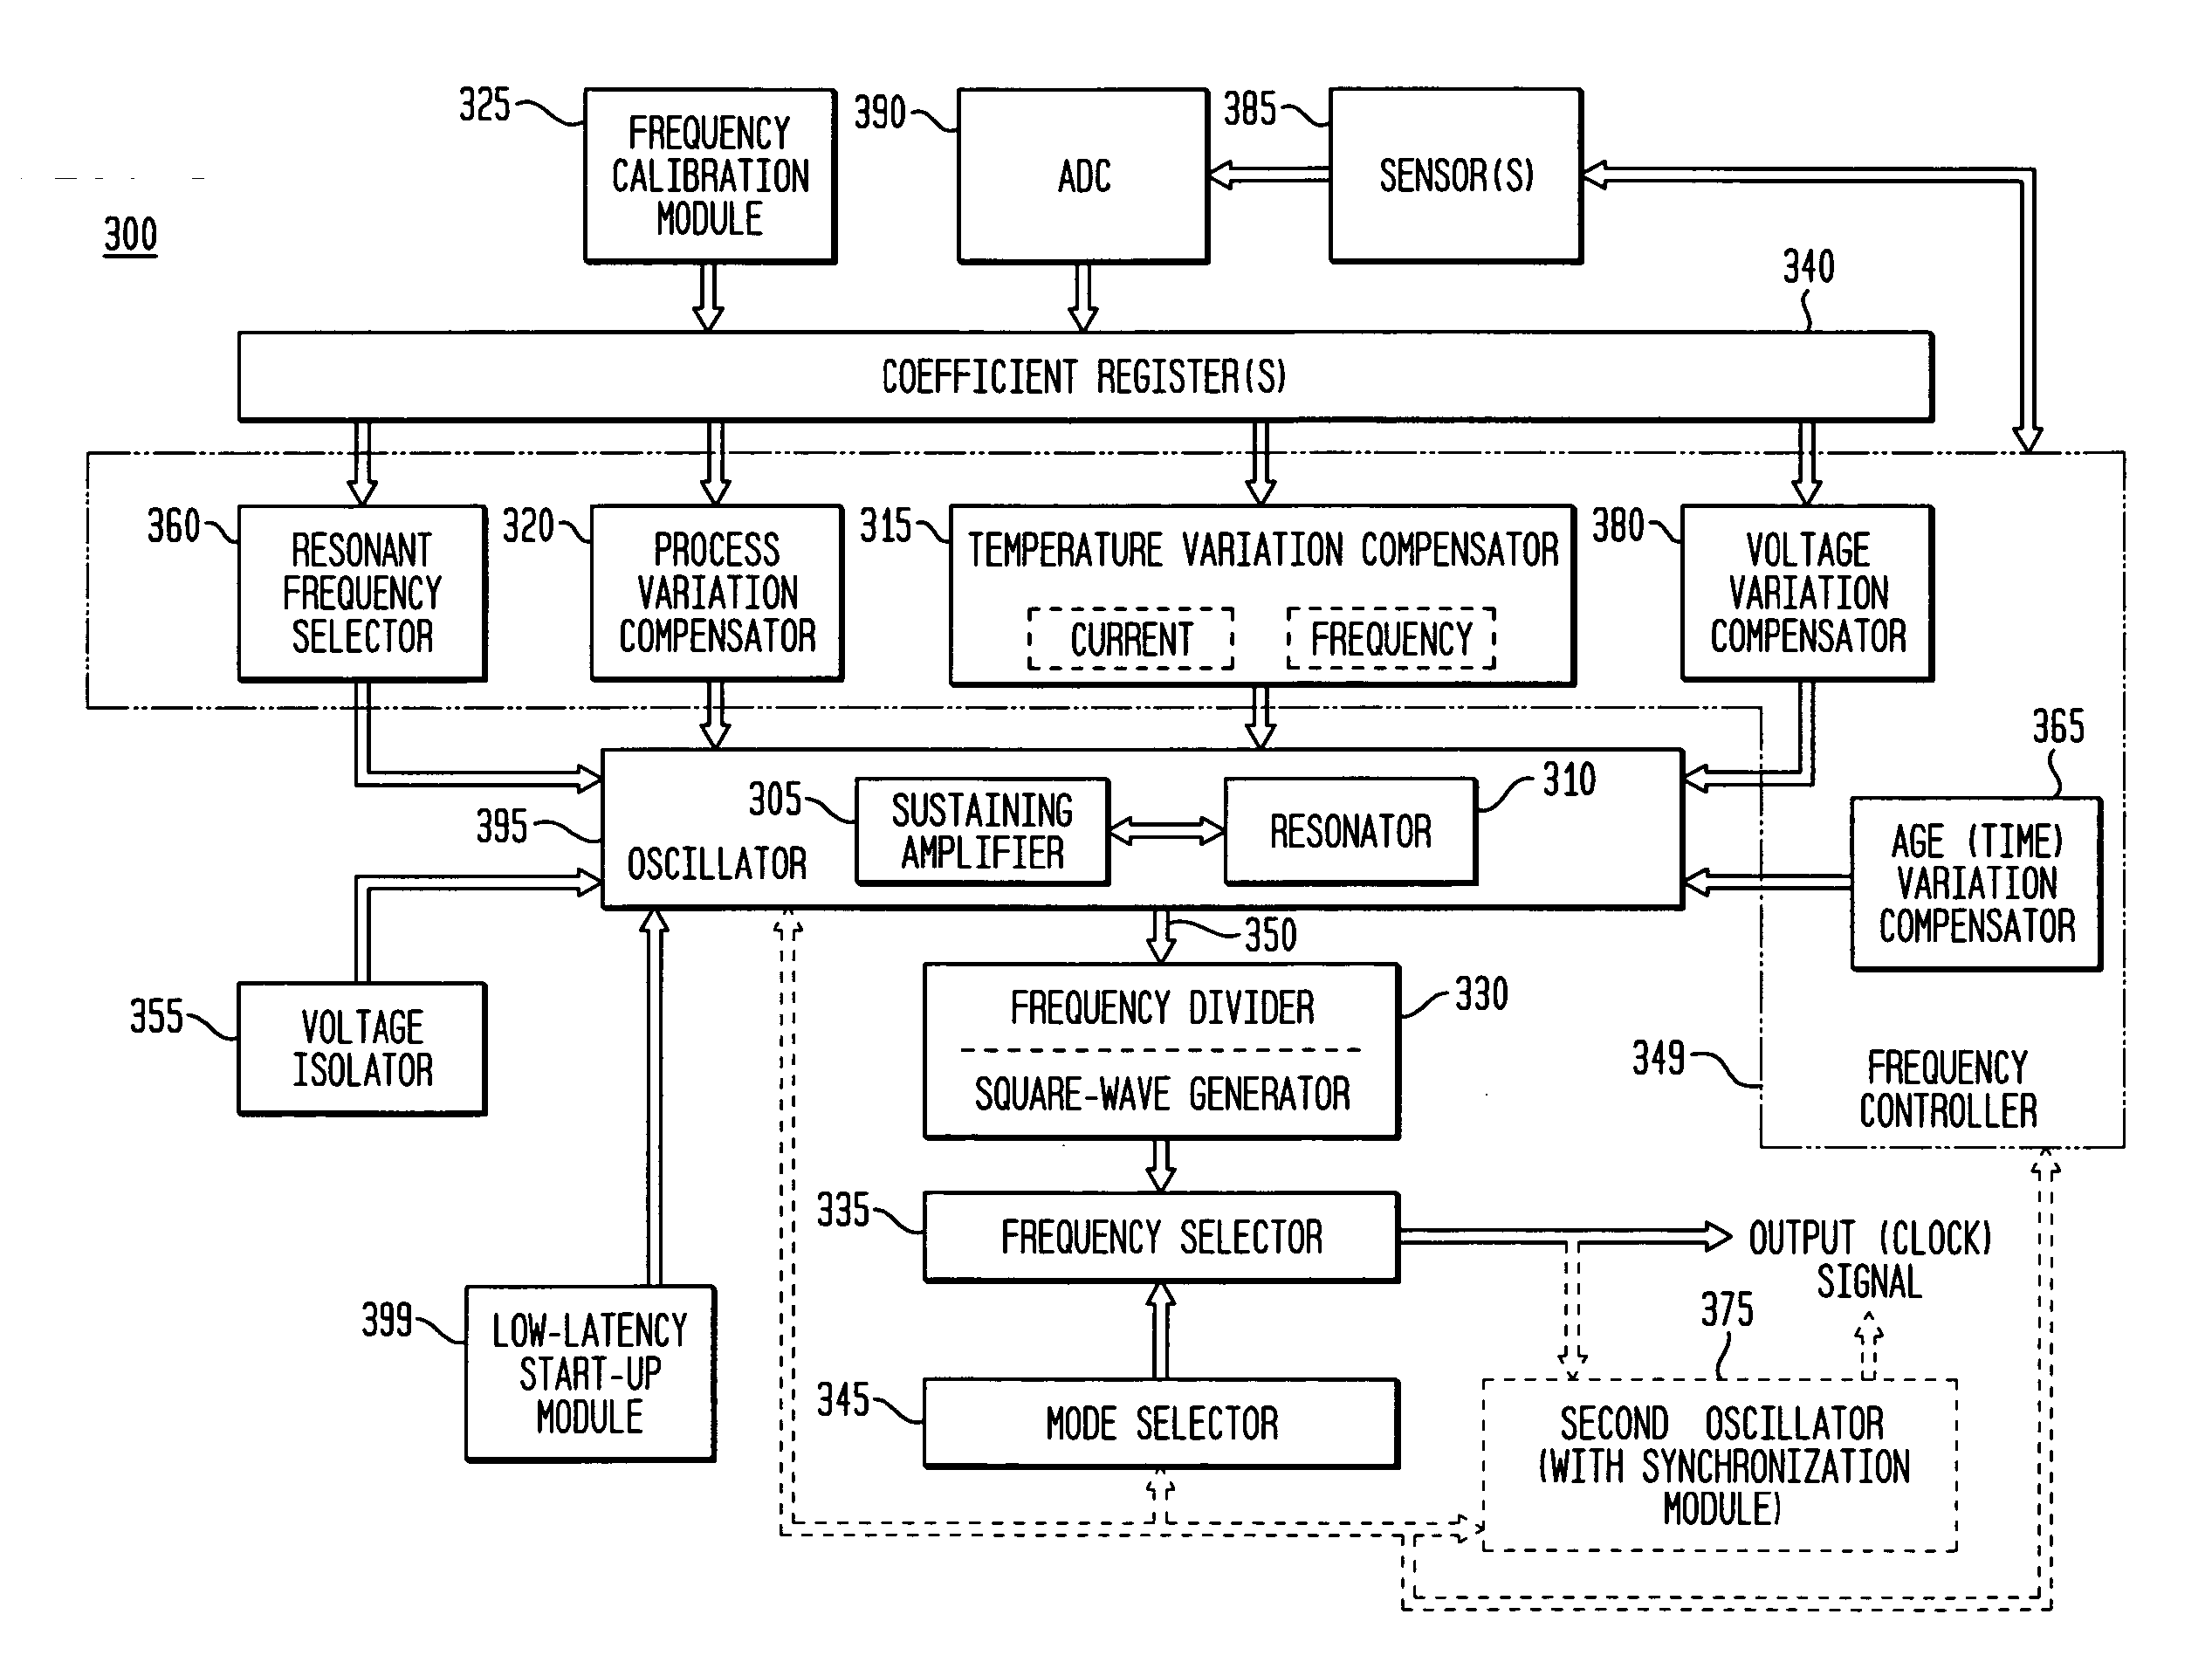 Frequency calibration for a monolithic clock generator and timing/frequency reference